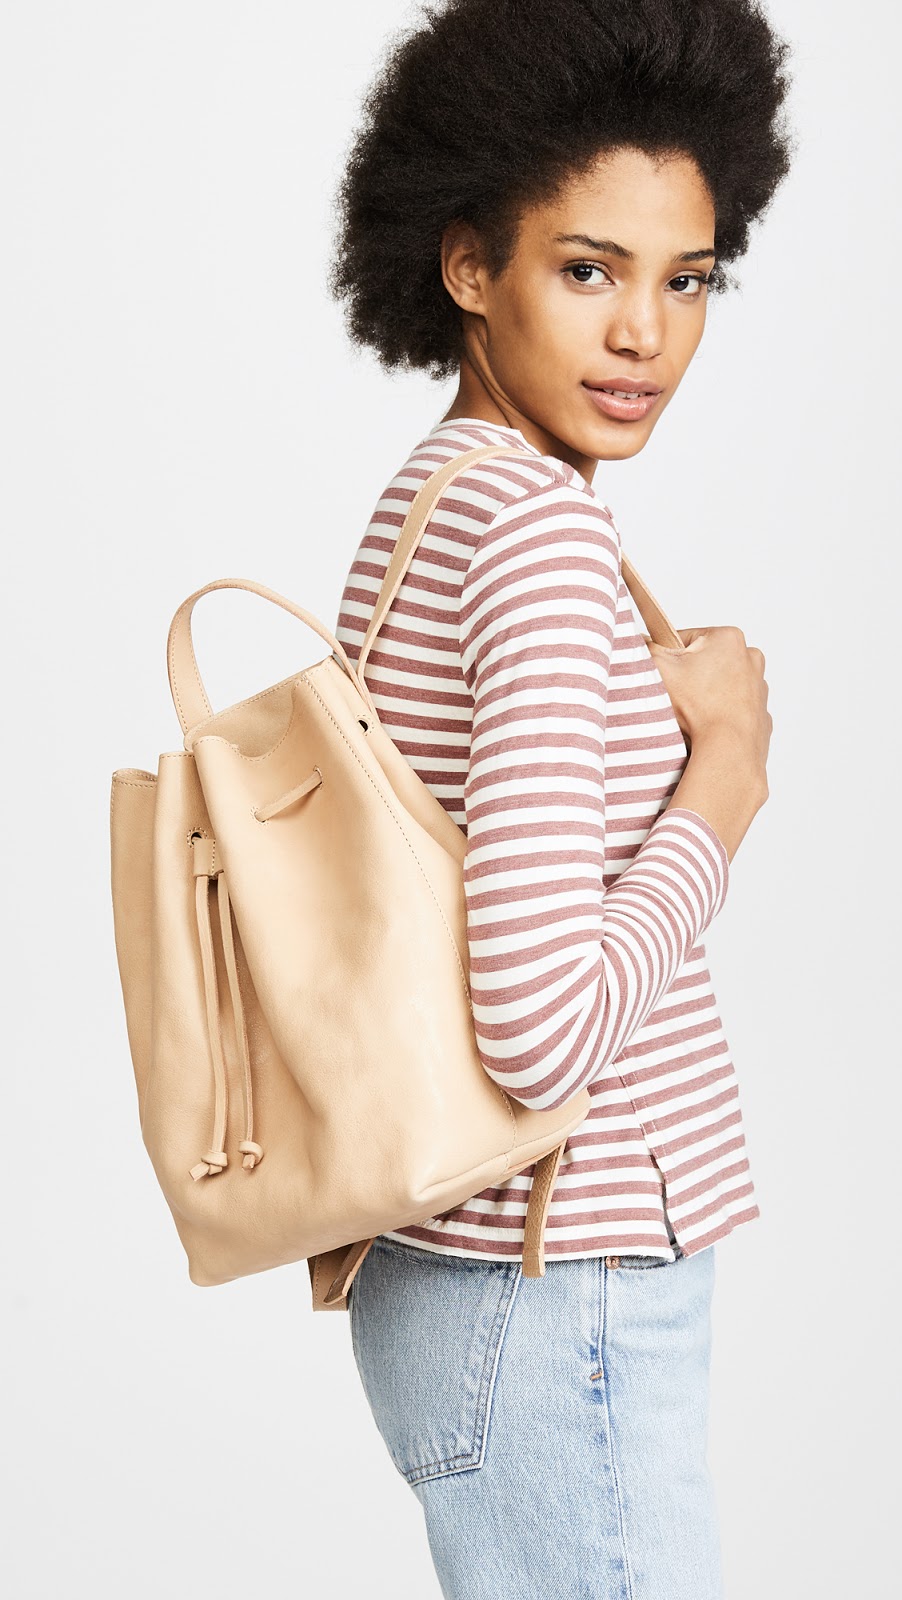 Picks from the Shopbop April 2018 Event of the Season :: Effortlessly with Roxy